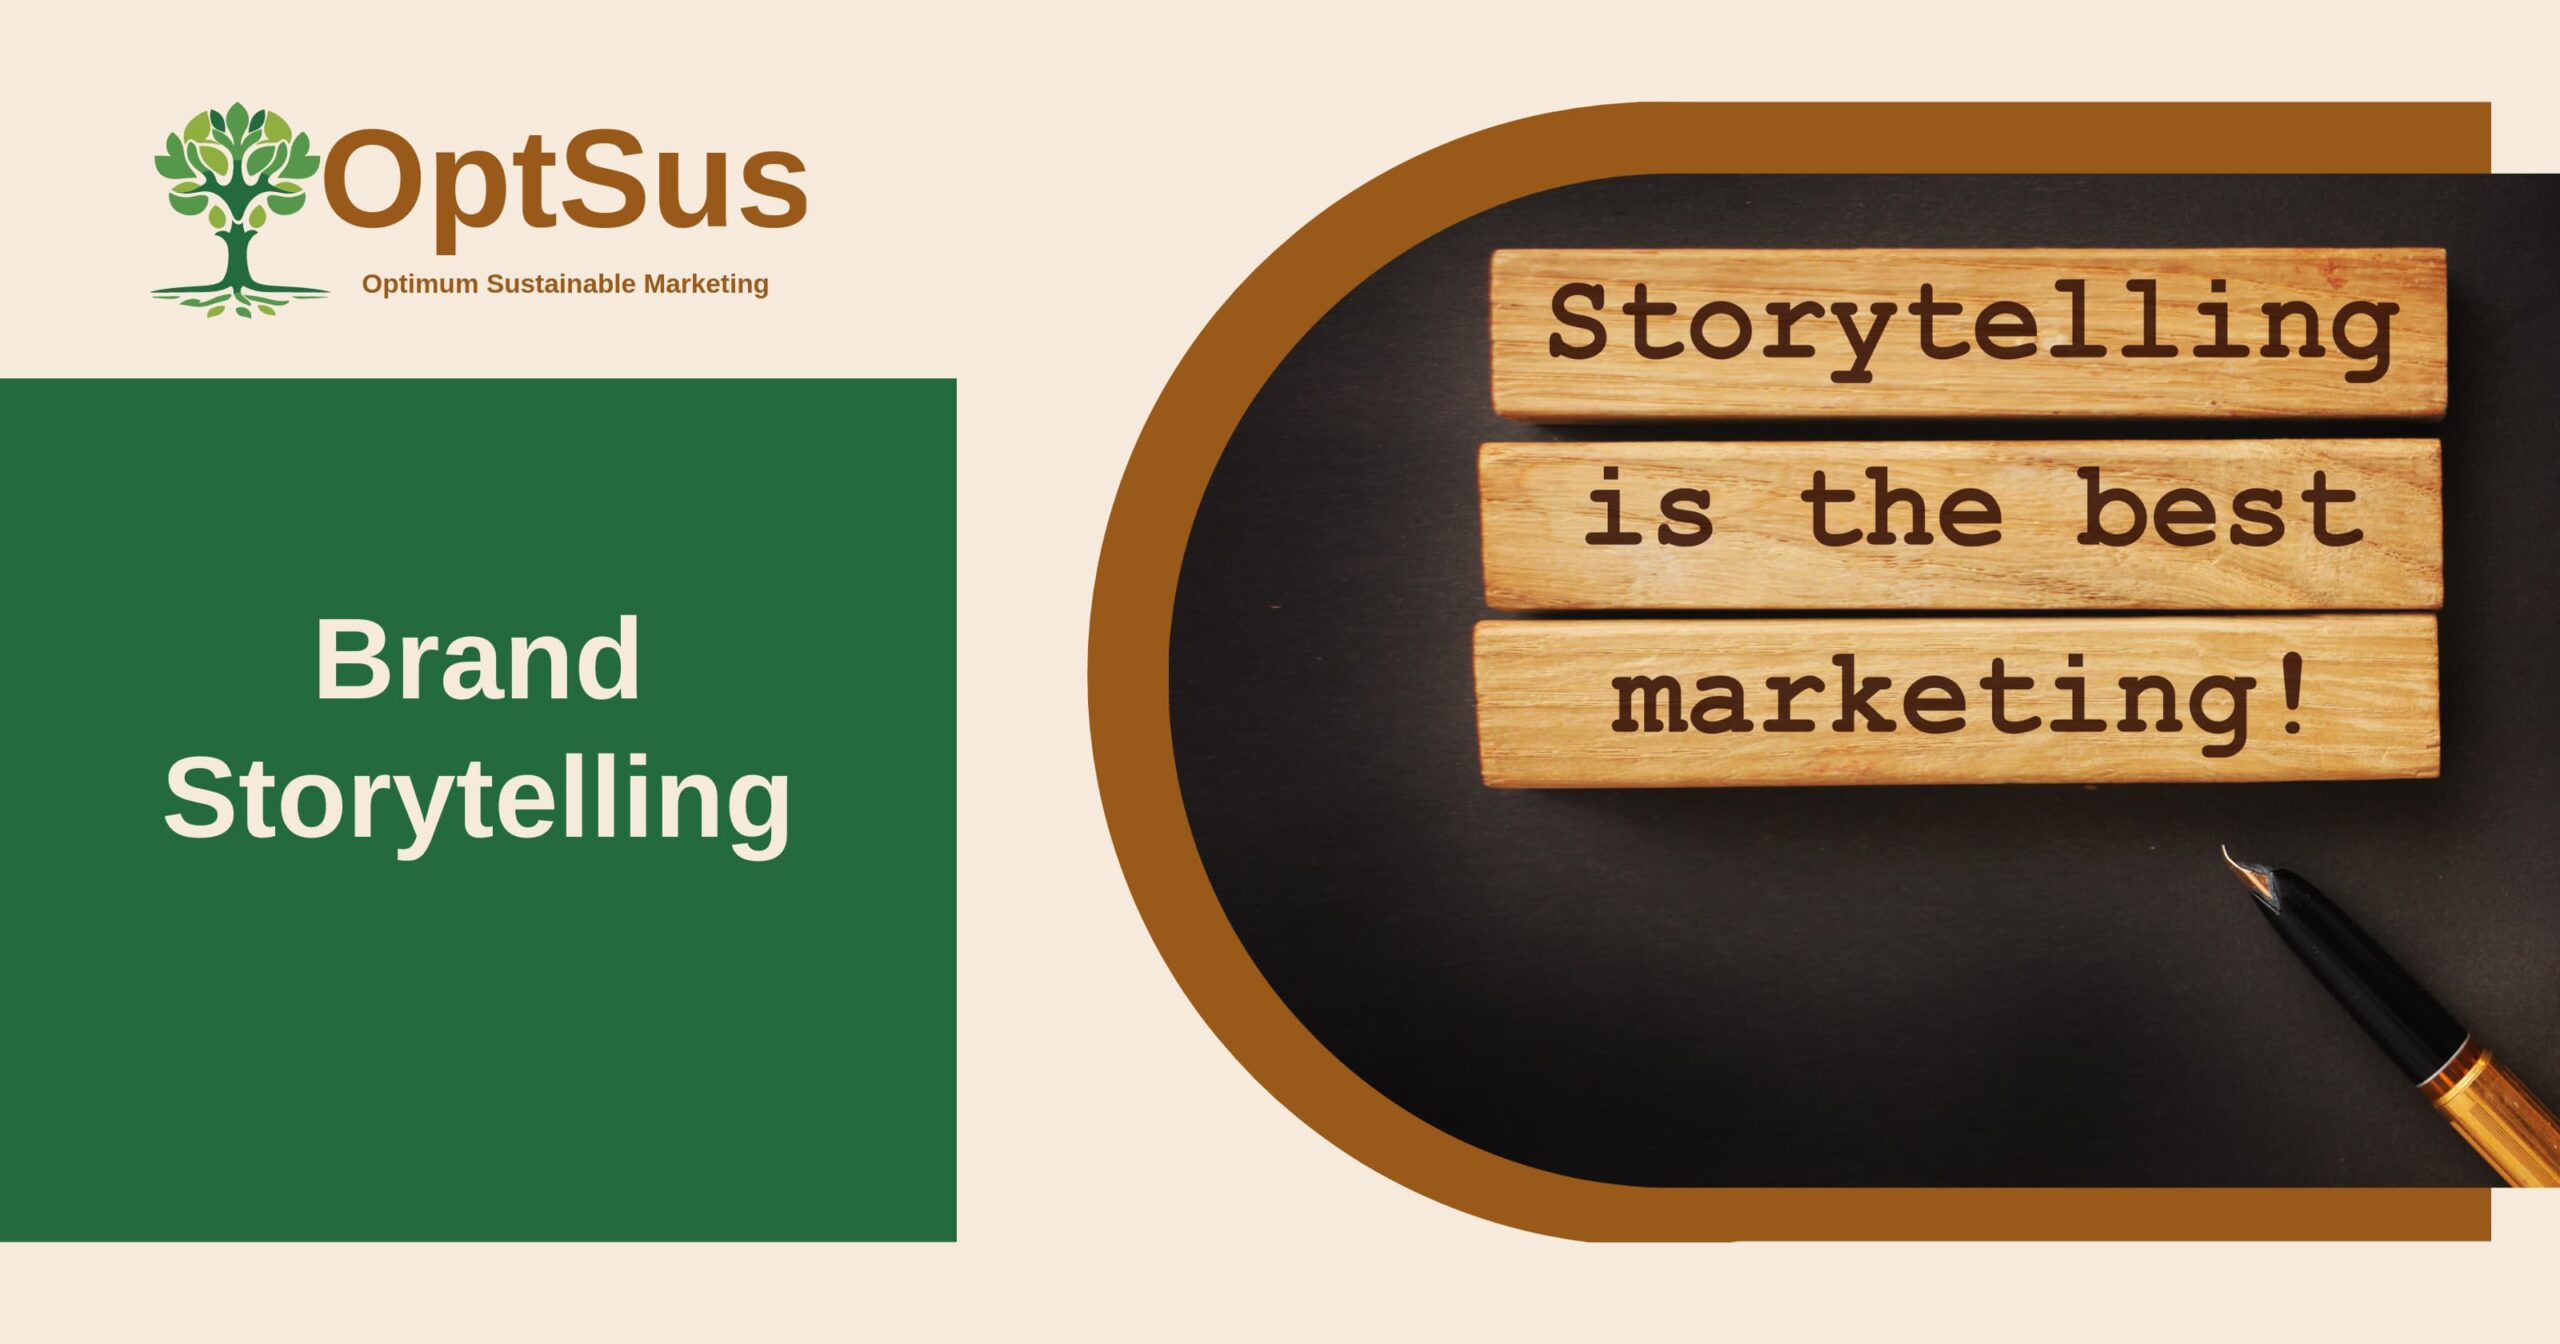 Blog post about brand storytelling showing image of wood blocks that say "storytelling is the best marketing".